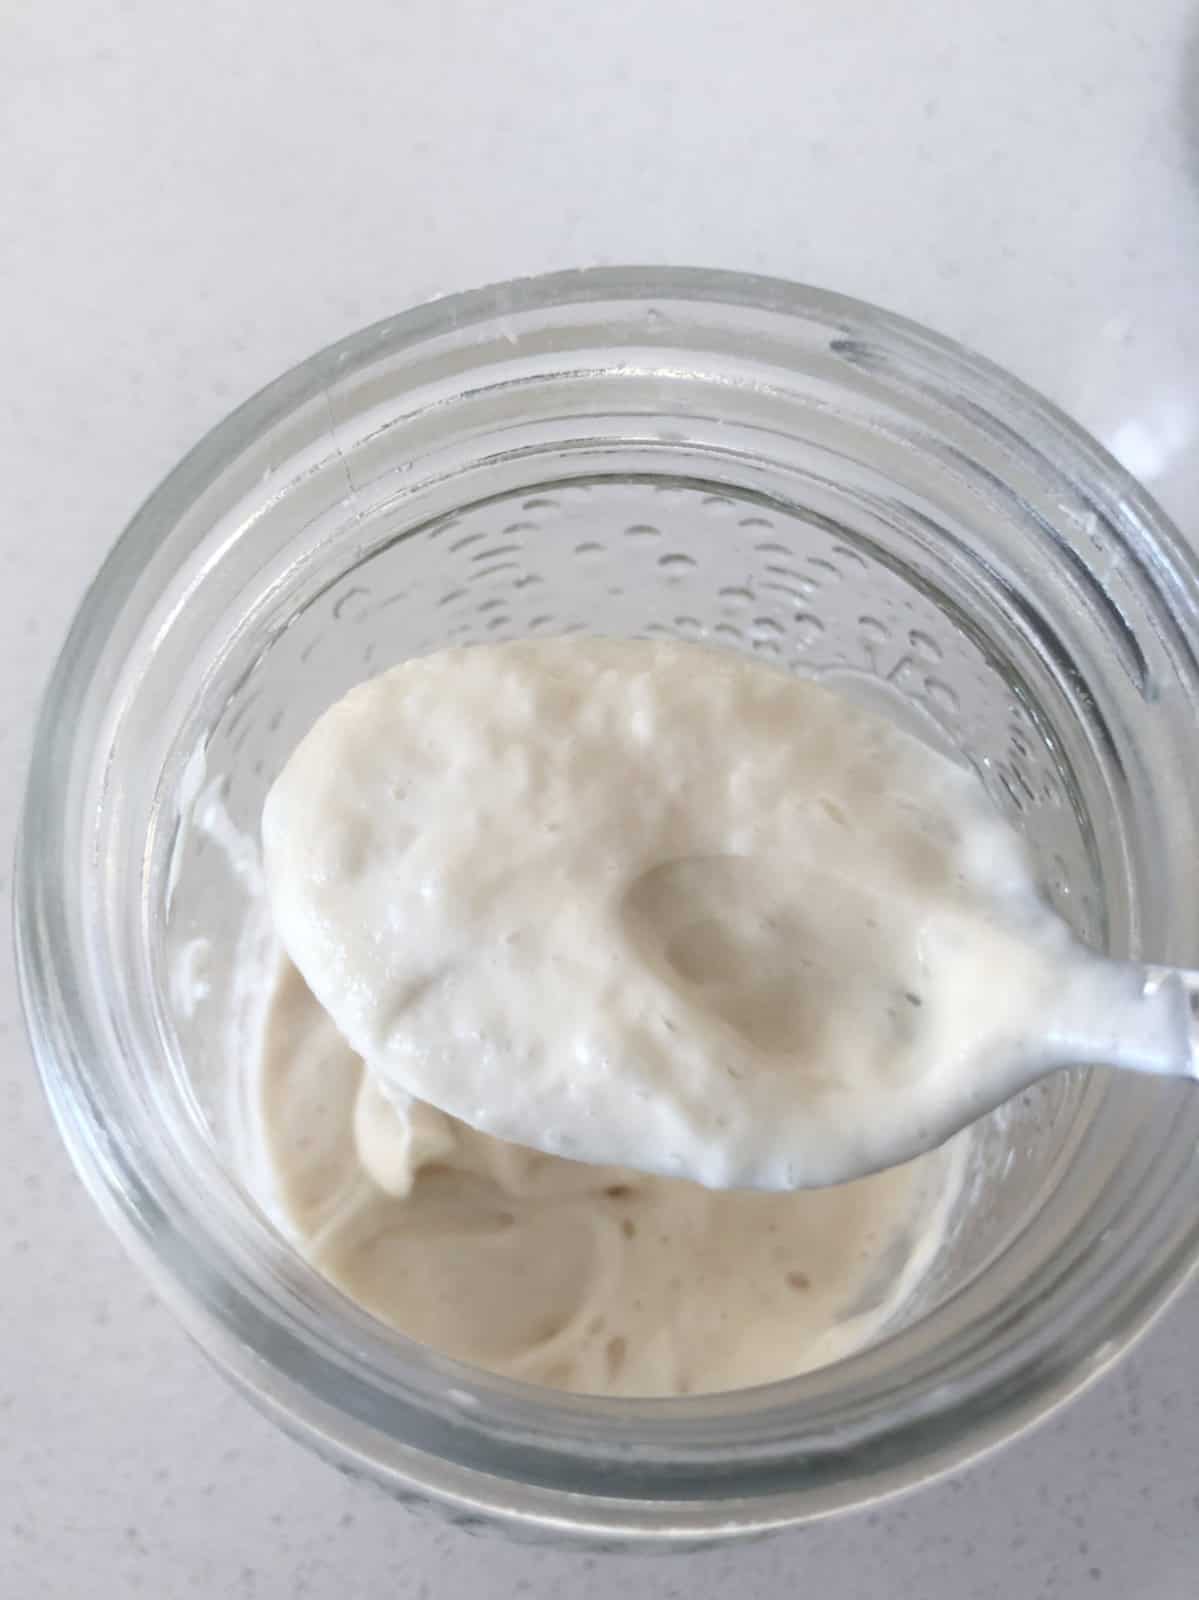 Creamy and smooth sourdough starter in a smooth to show the final texture.